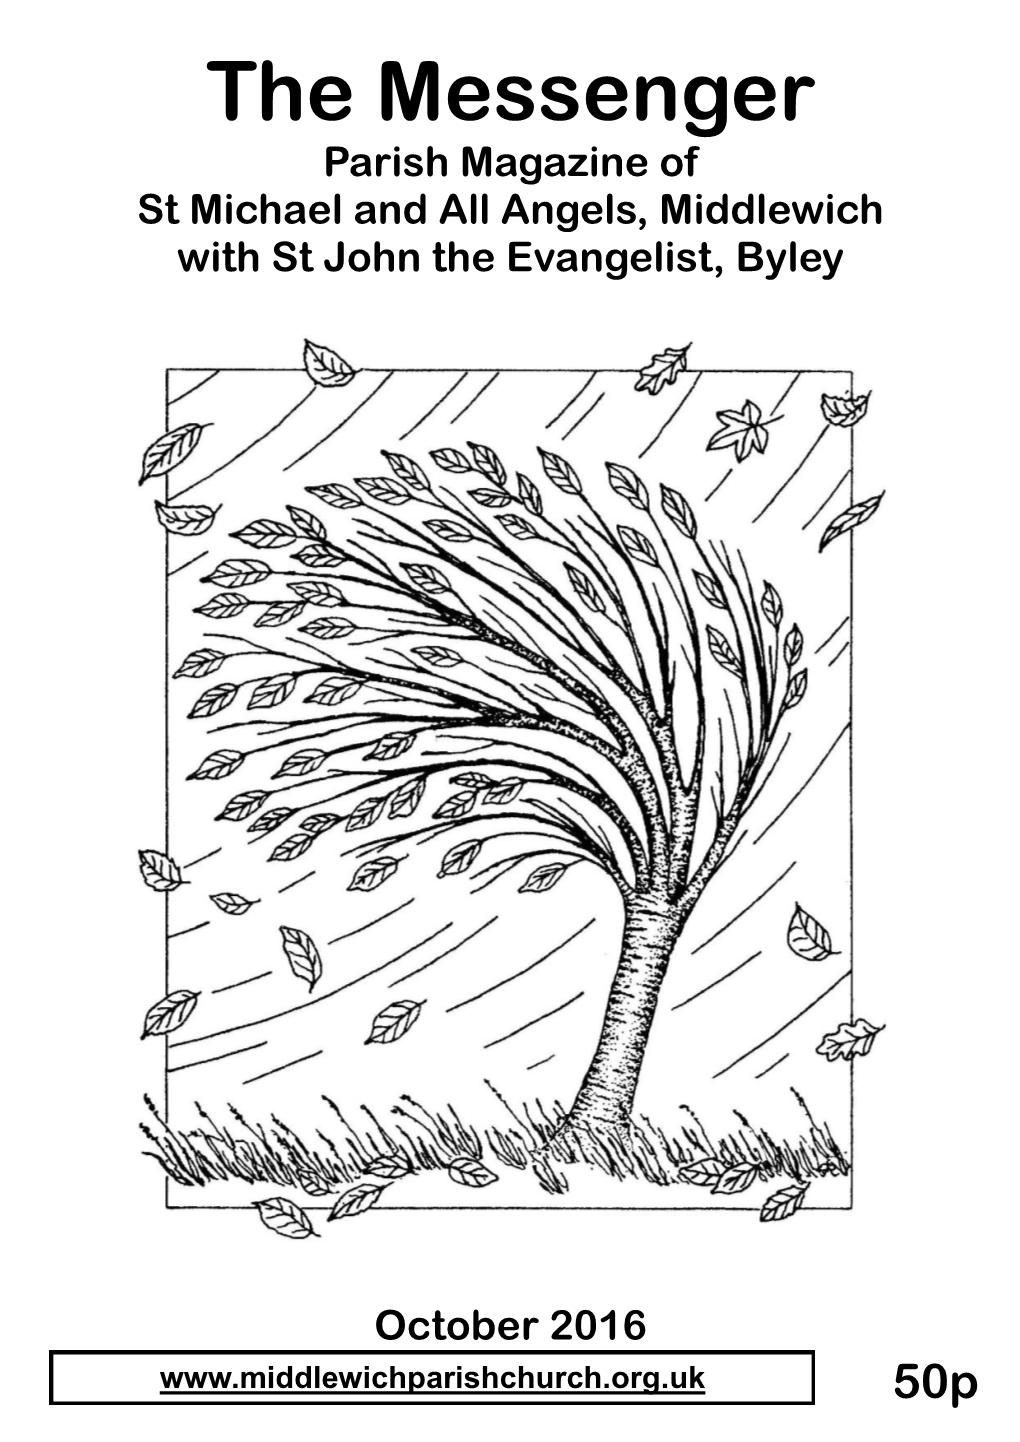 The Messenger Parish Magazine of St Michael and All Angels, Middlewich with St John the Evangelist, Byley